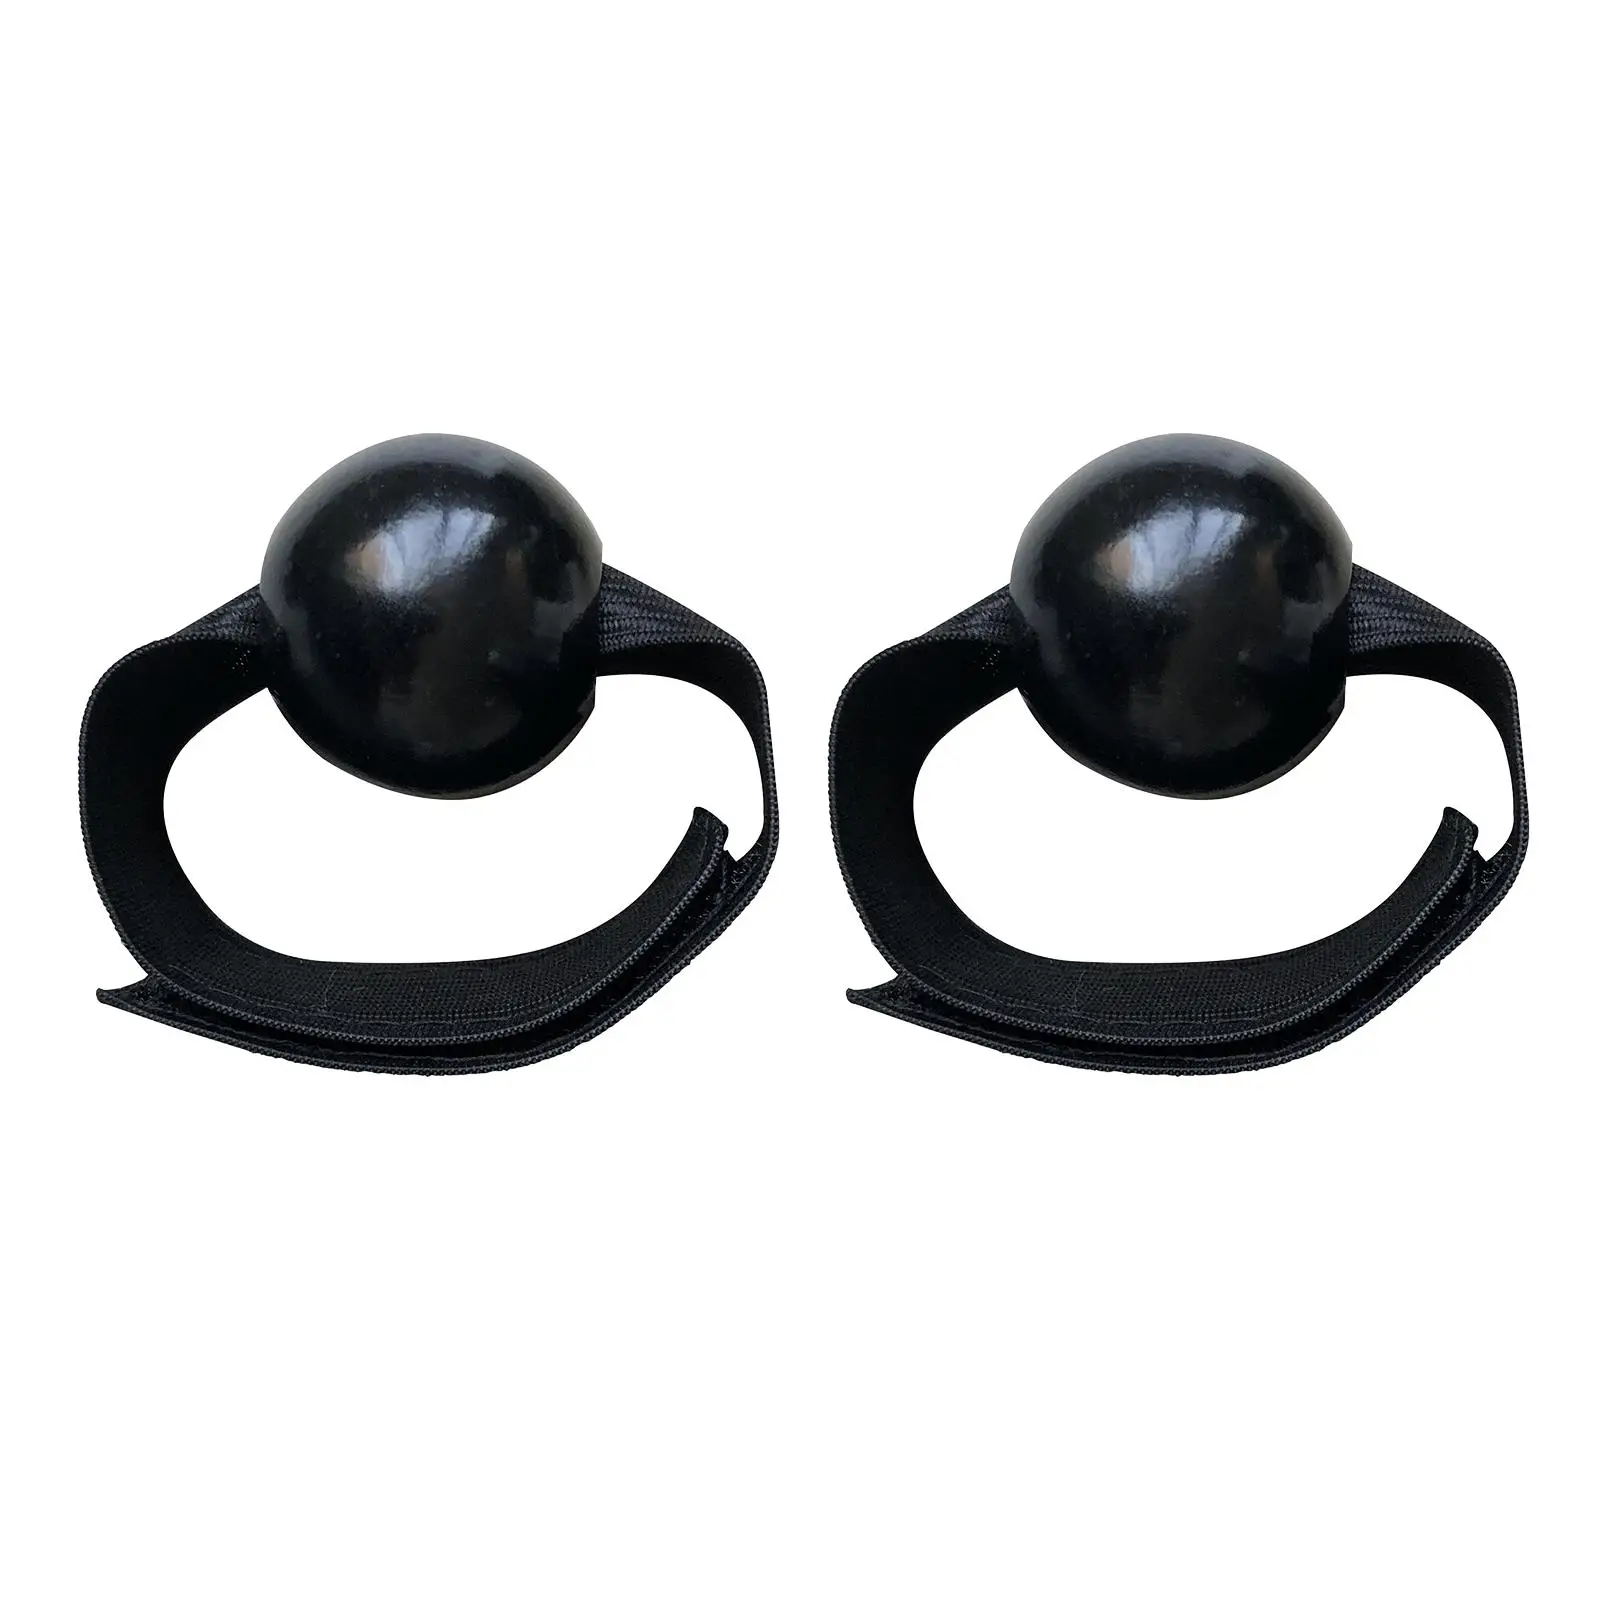 Volleyball Training Band with Adjustable Strap  Knobs - Helping Learn Proper Hand Position ? Fit for Adults  Home Practice